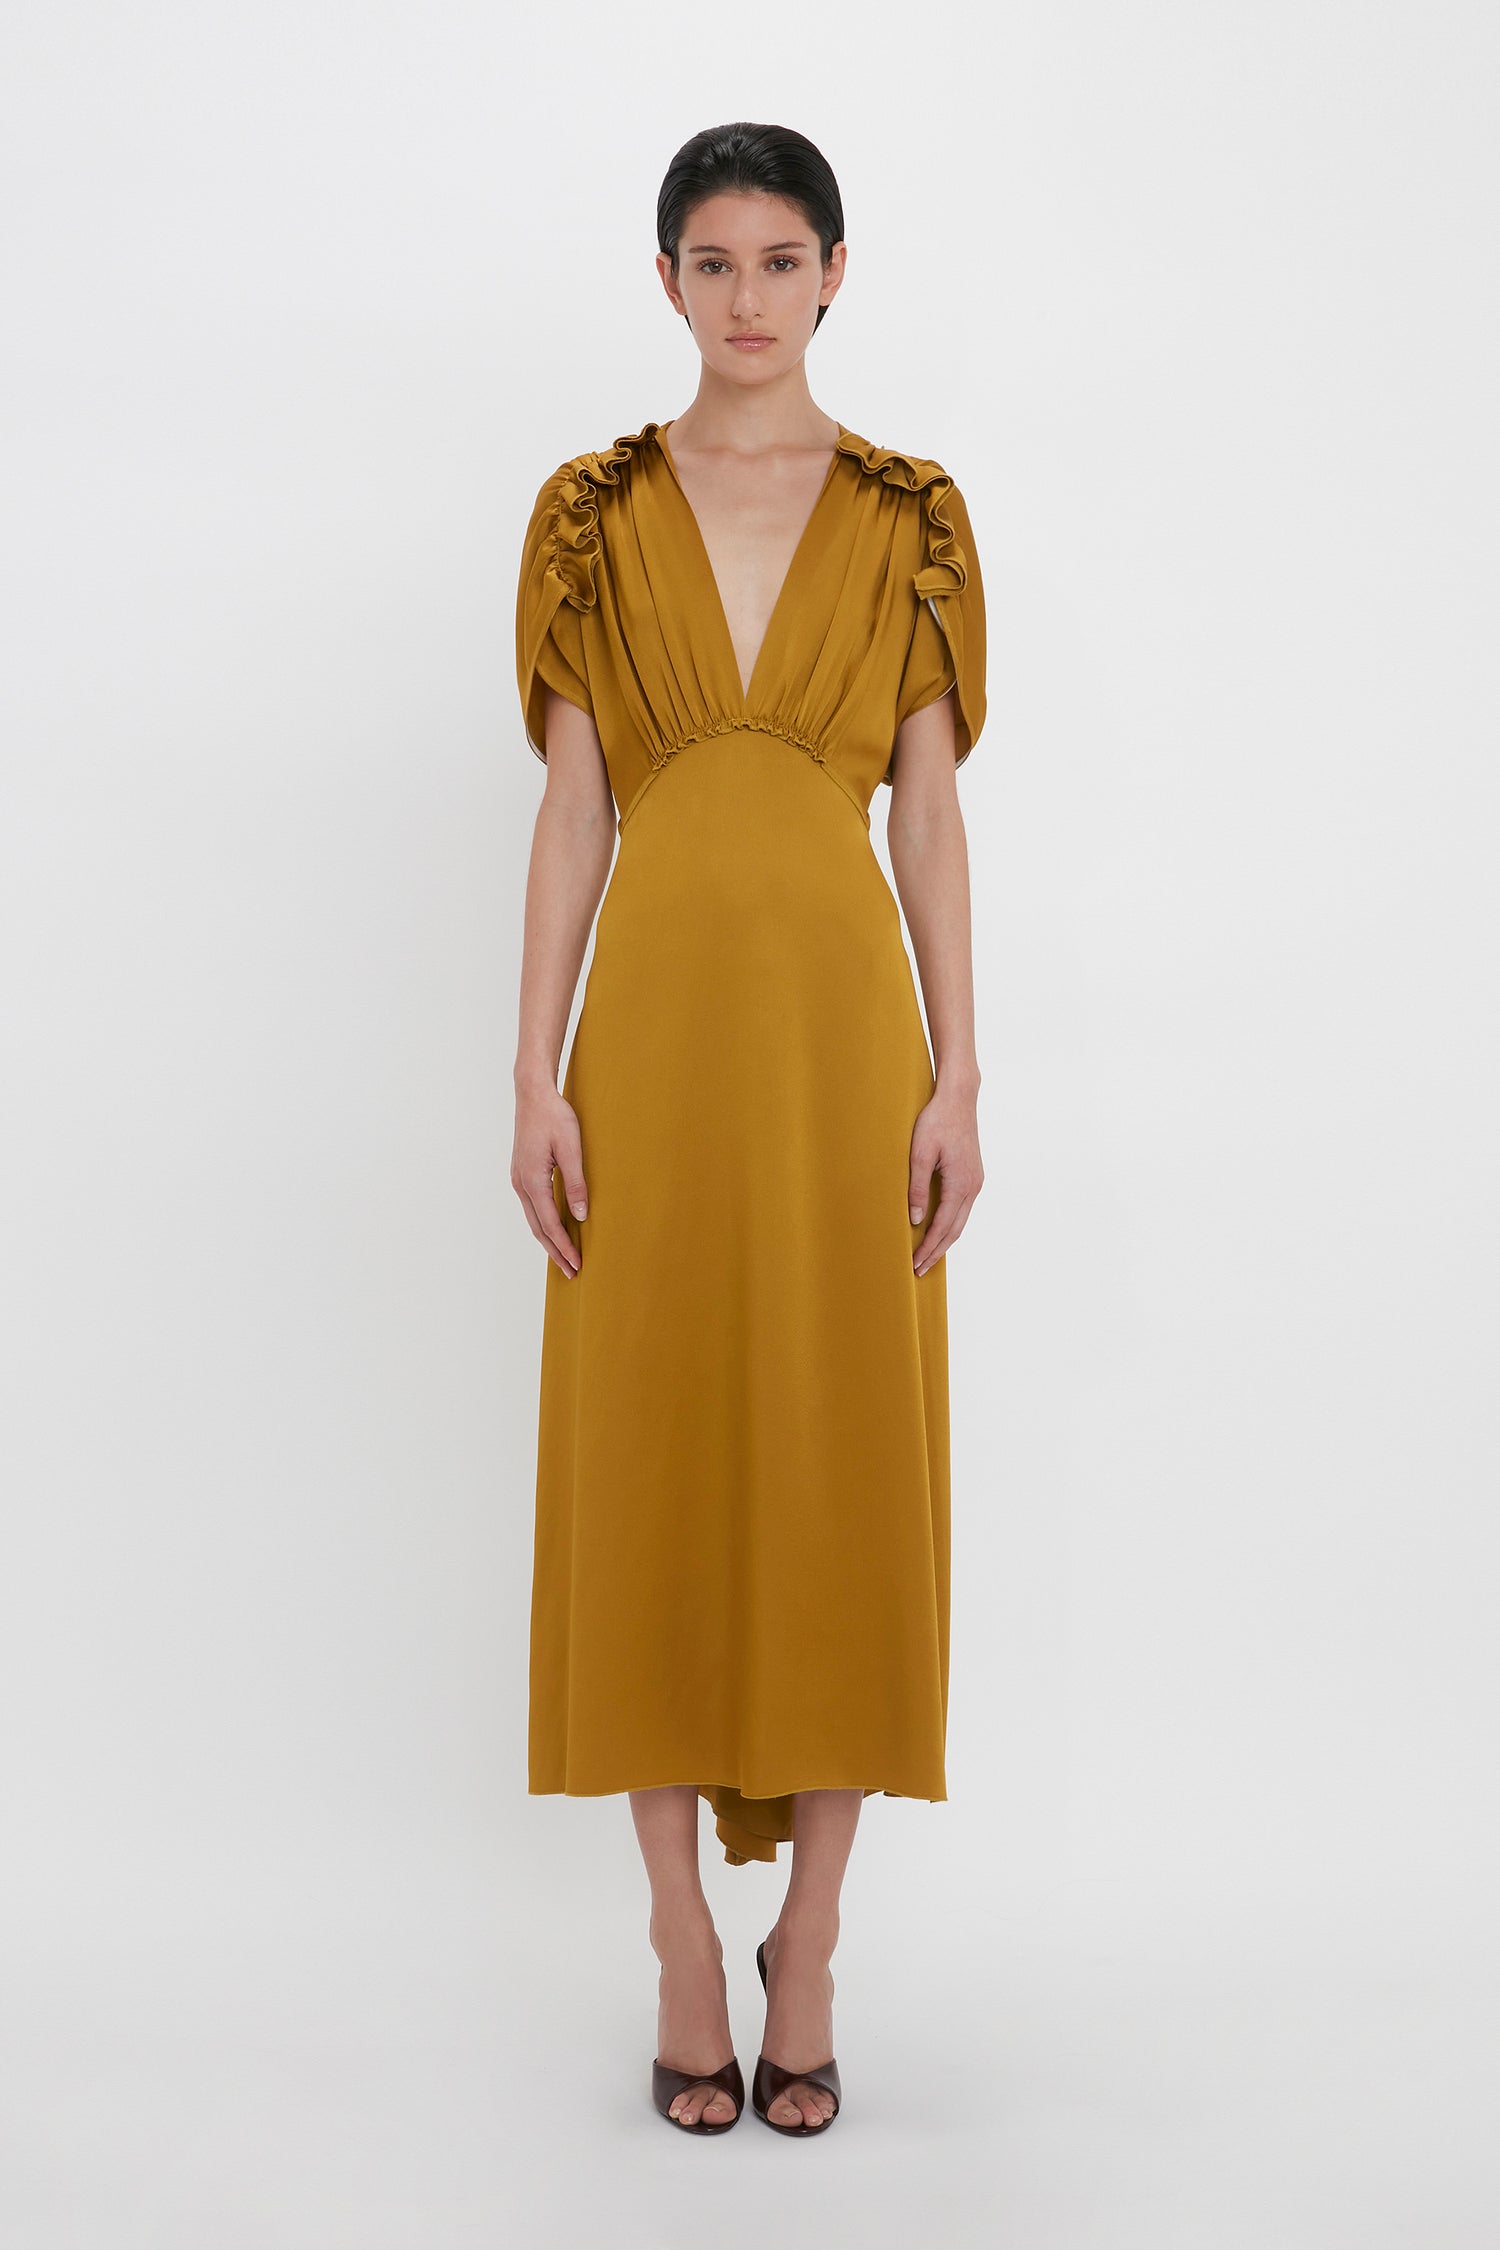 Woman wearing a Victoria Beckham V-Neck Ruffle Midi Dress In Harvest Gold with shoulder frills, short ruffled sleeves, and mid-calf length, standing in a studio against a plain white background.